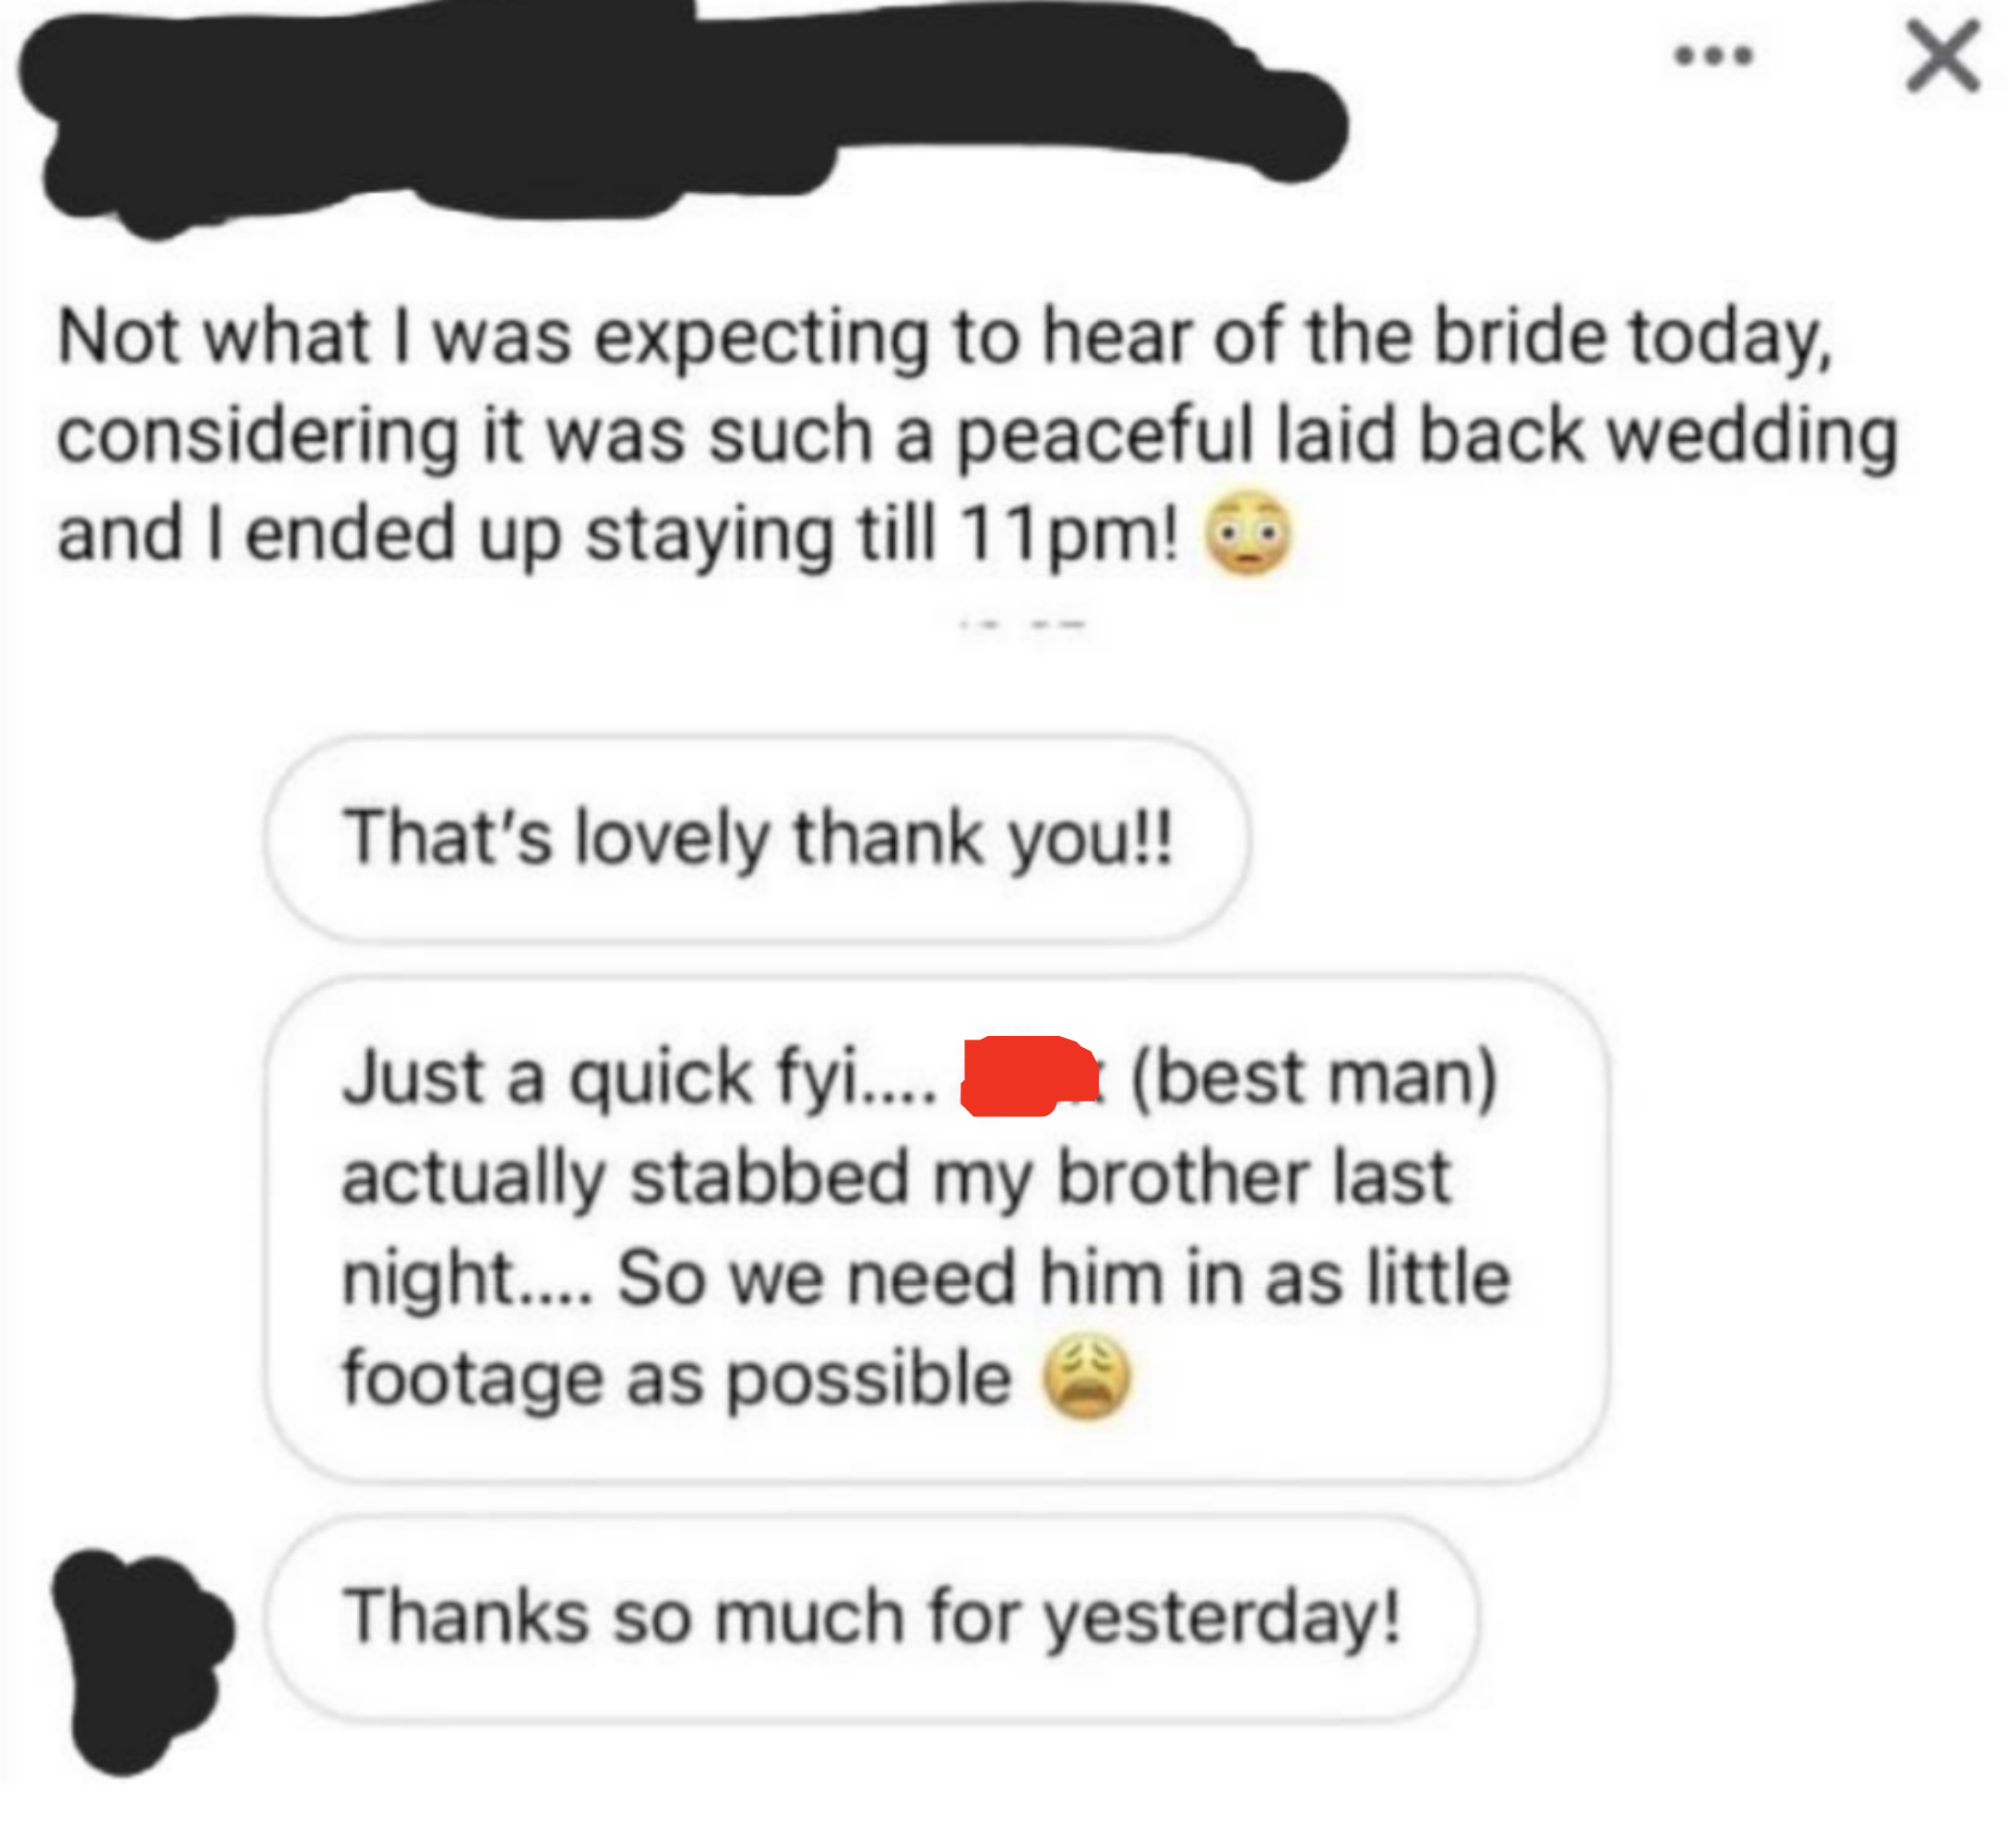 message from bride saying the best man stabbed her brother and he needs to be taken out of the footage